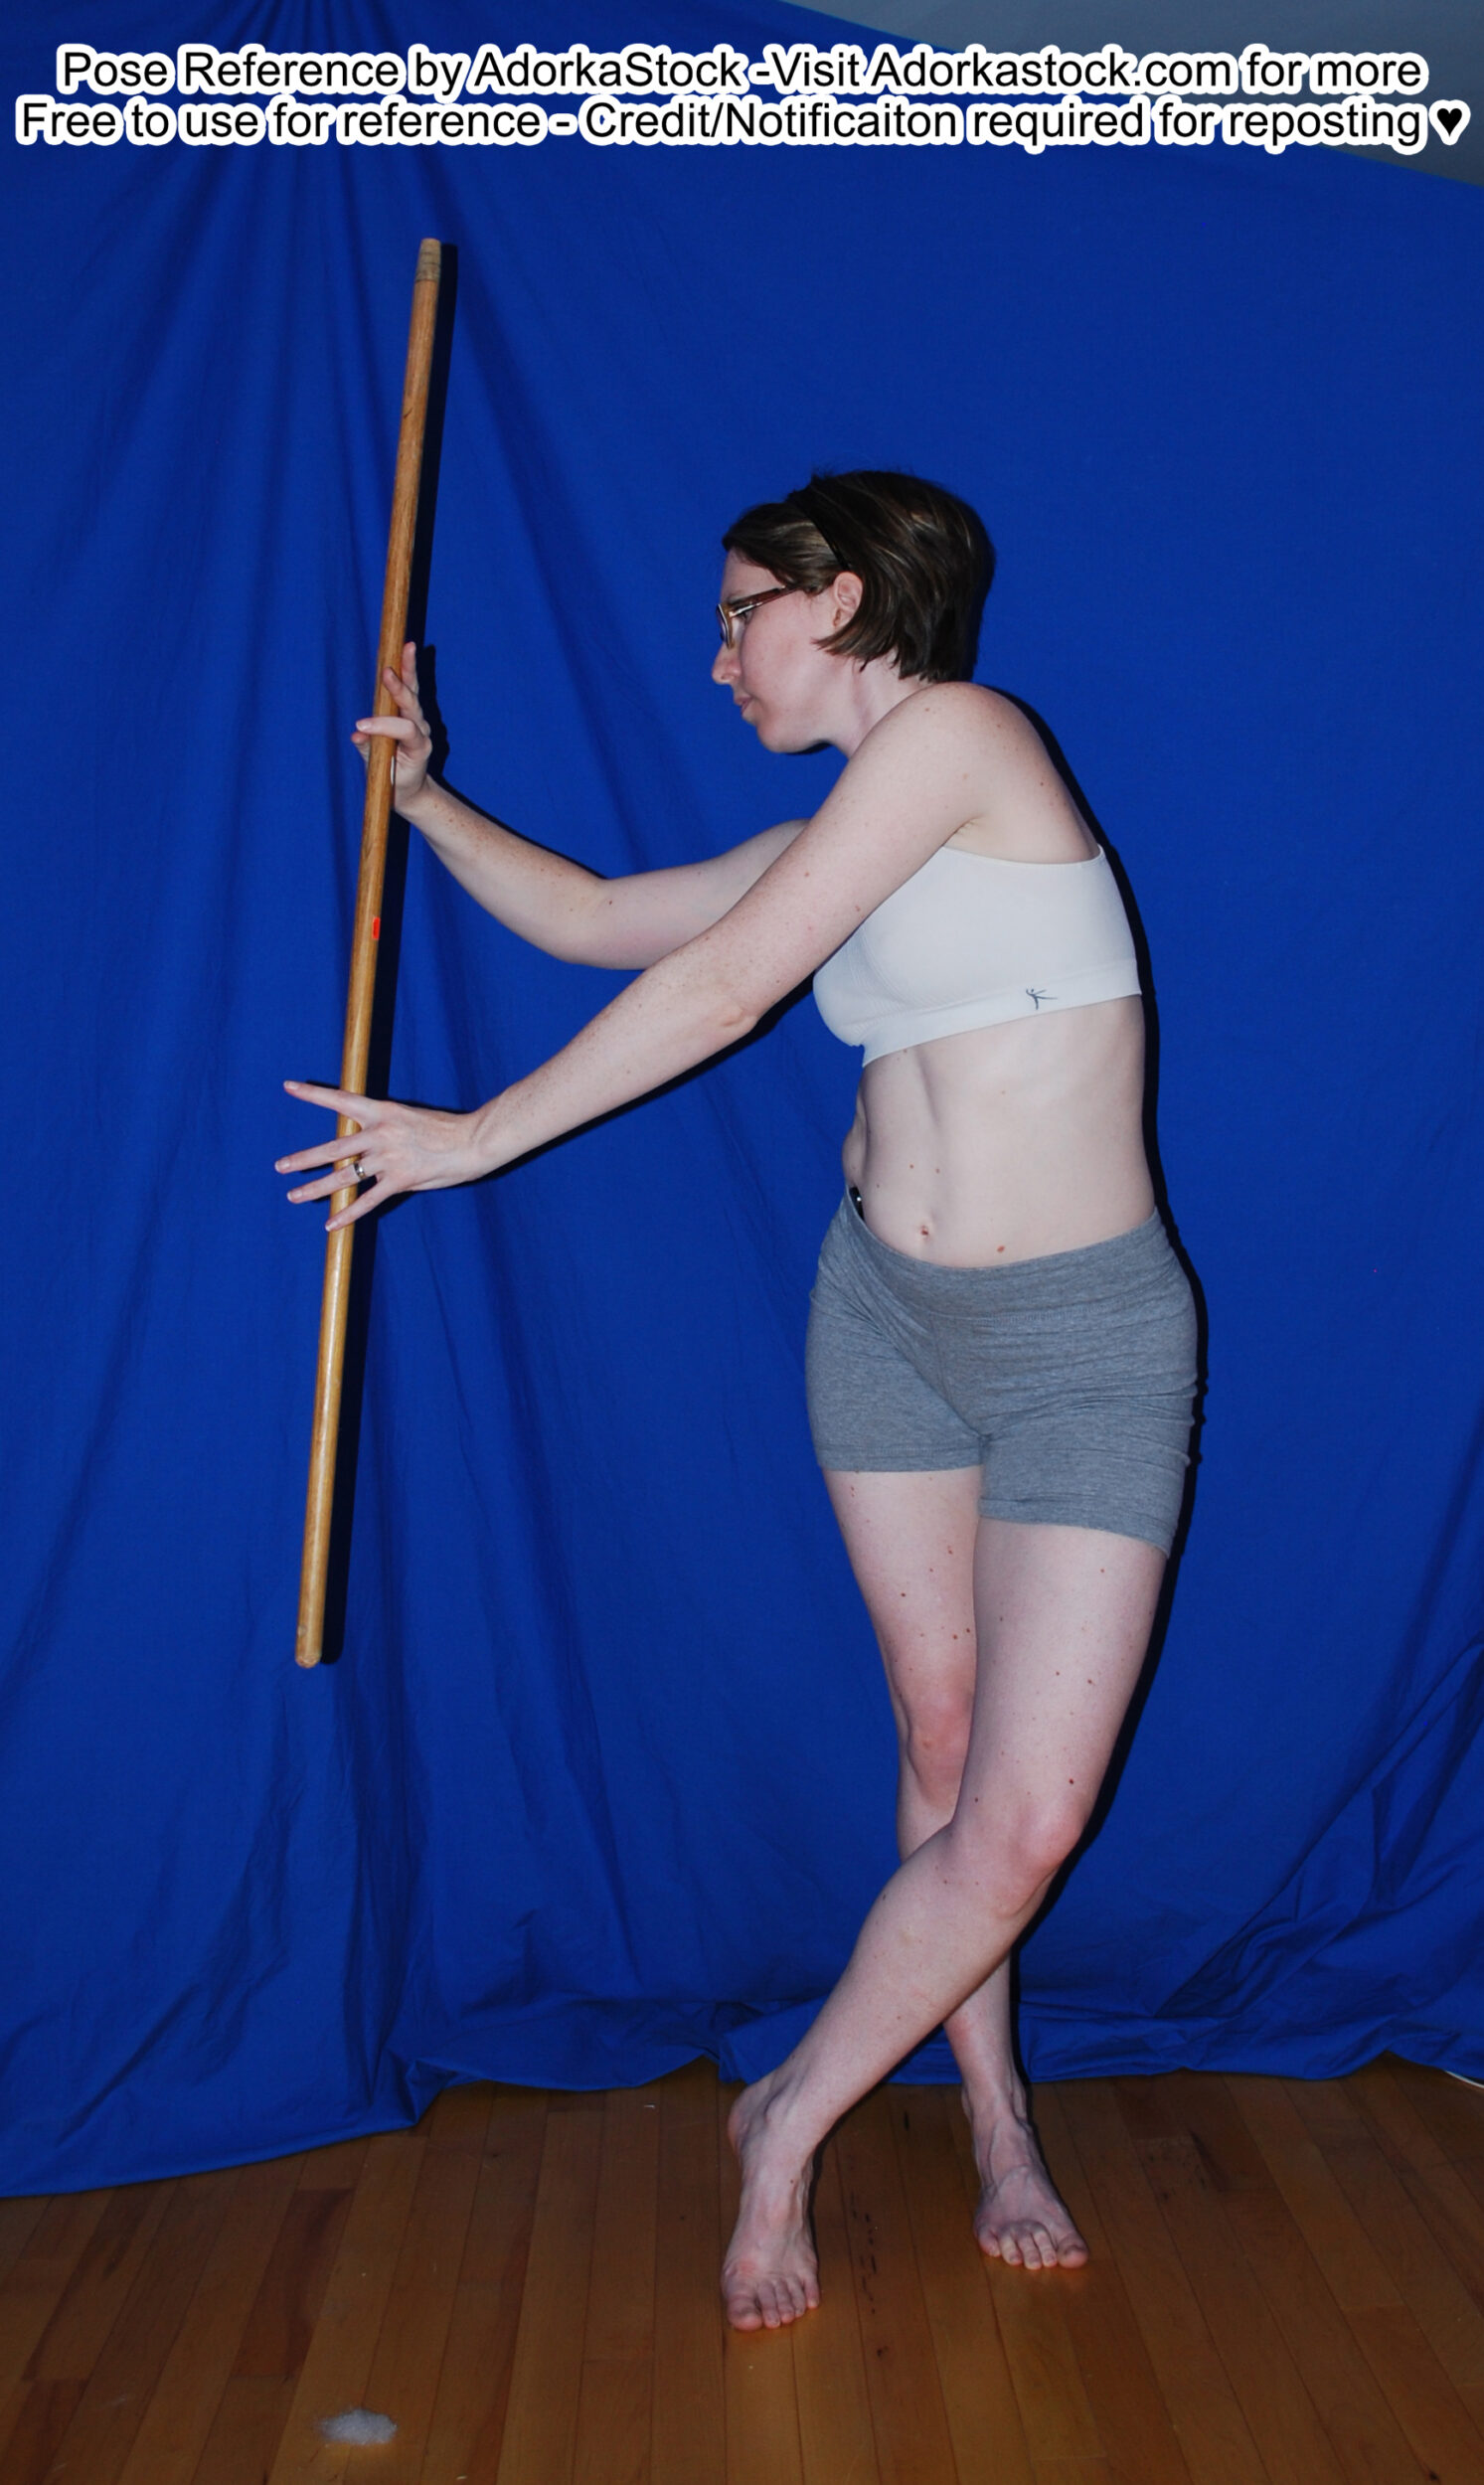 thin, white, female pose reference model in standing, twisting pose with staff prop